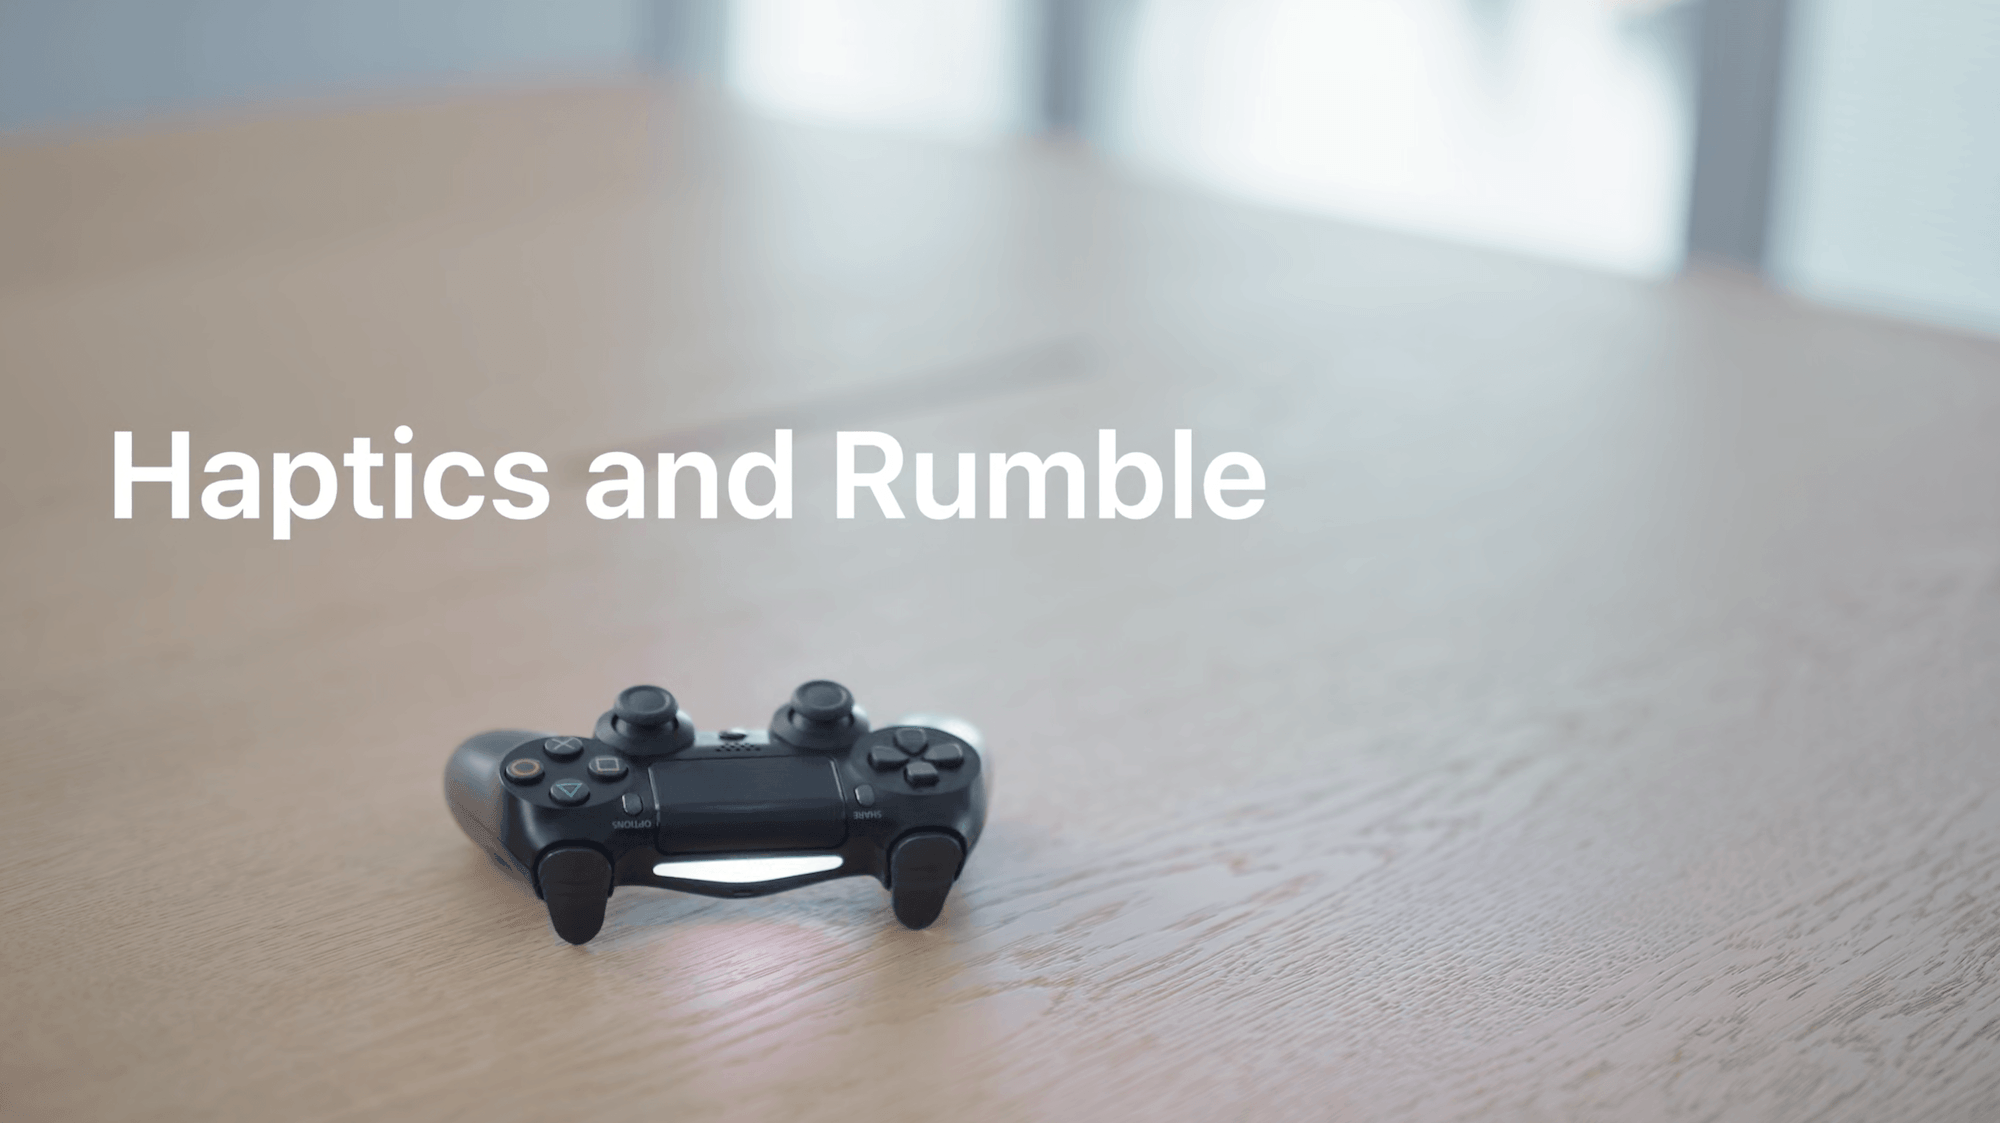 Haptics, rumble, and controller-specific features are now supported on Apple's platforms. Source: Apple.